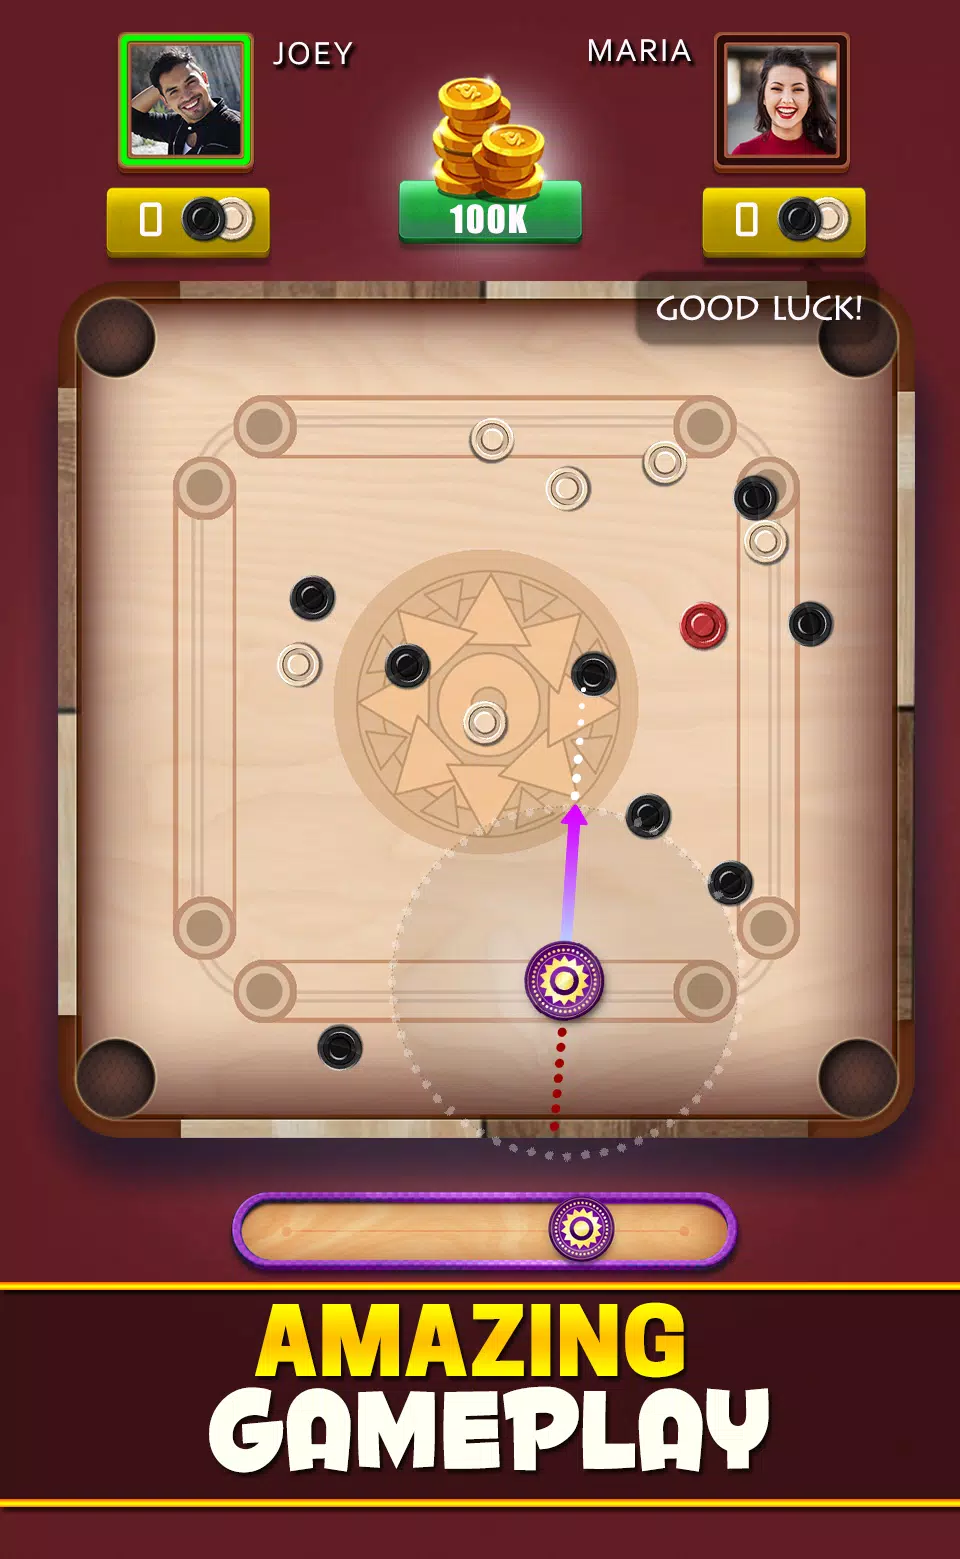 Download the Latest Version of Carrom Club Apk for Android